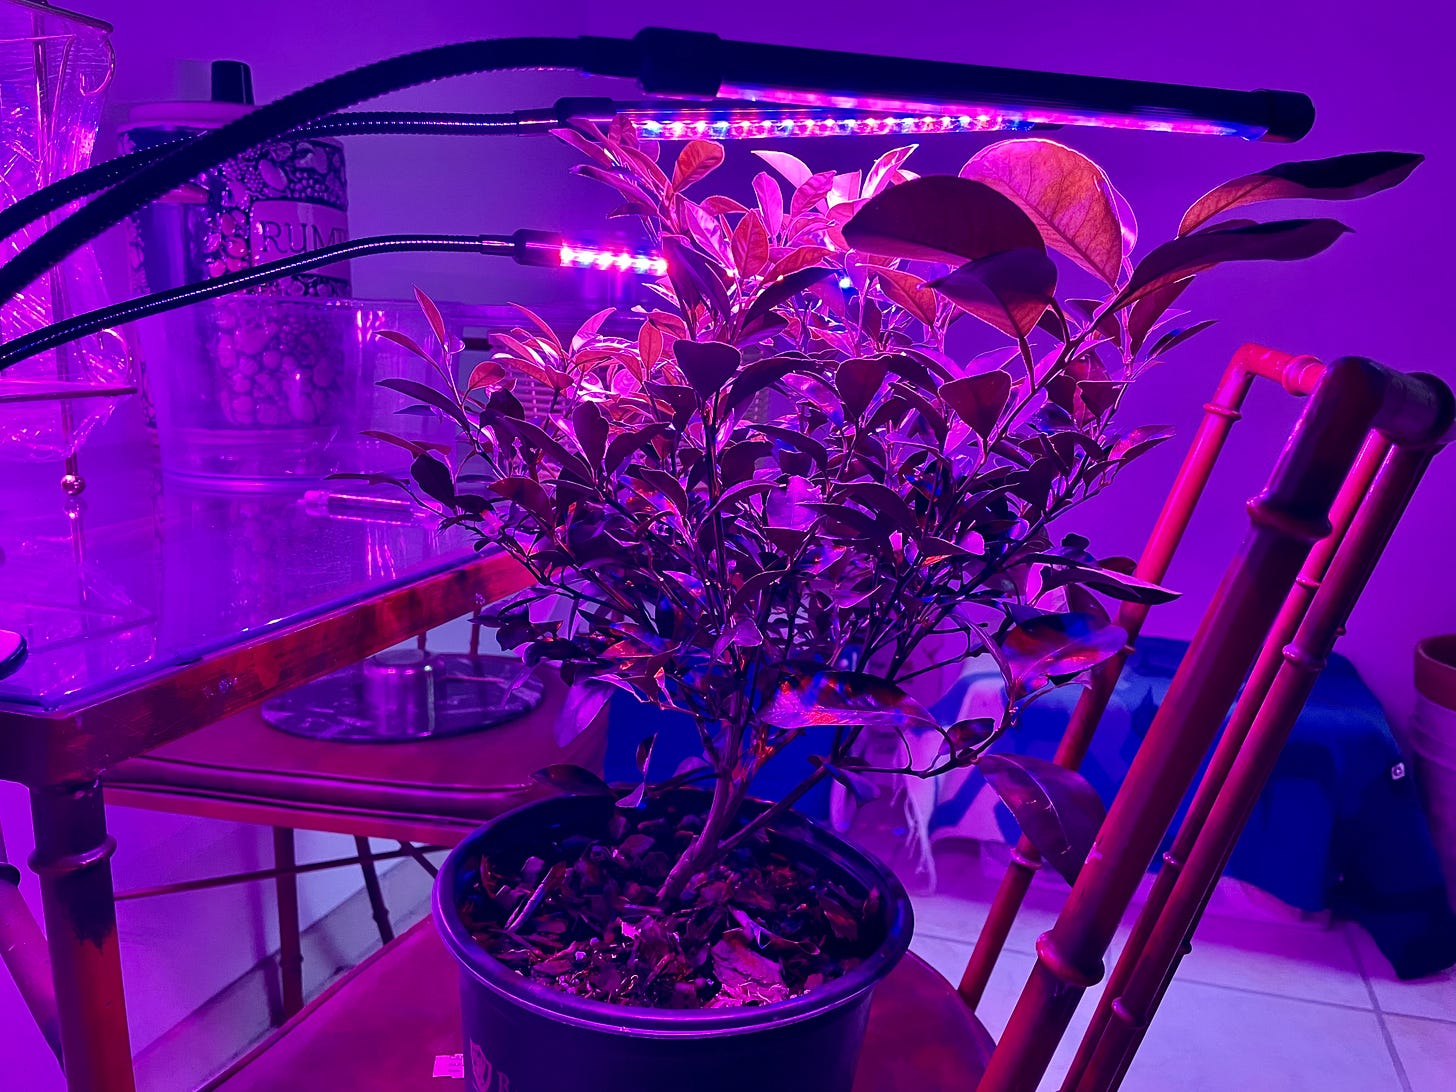 ID: A shrubby looking calamansi sitting on a kitchen chair under purple grow lights.